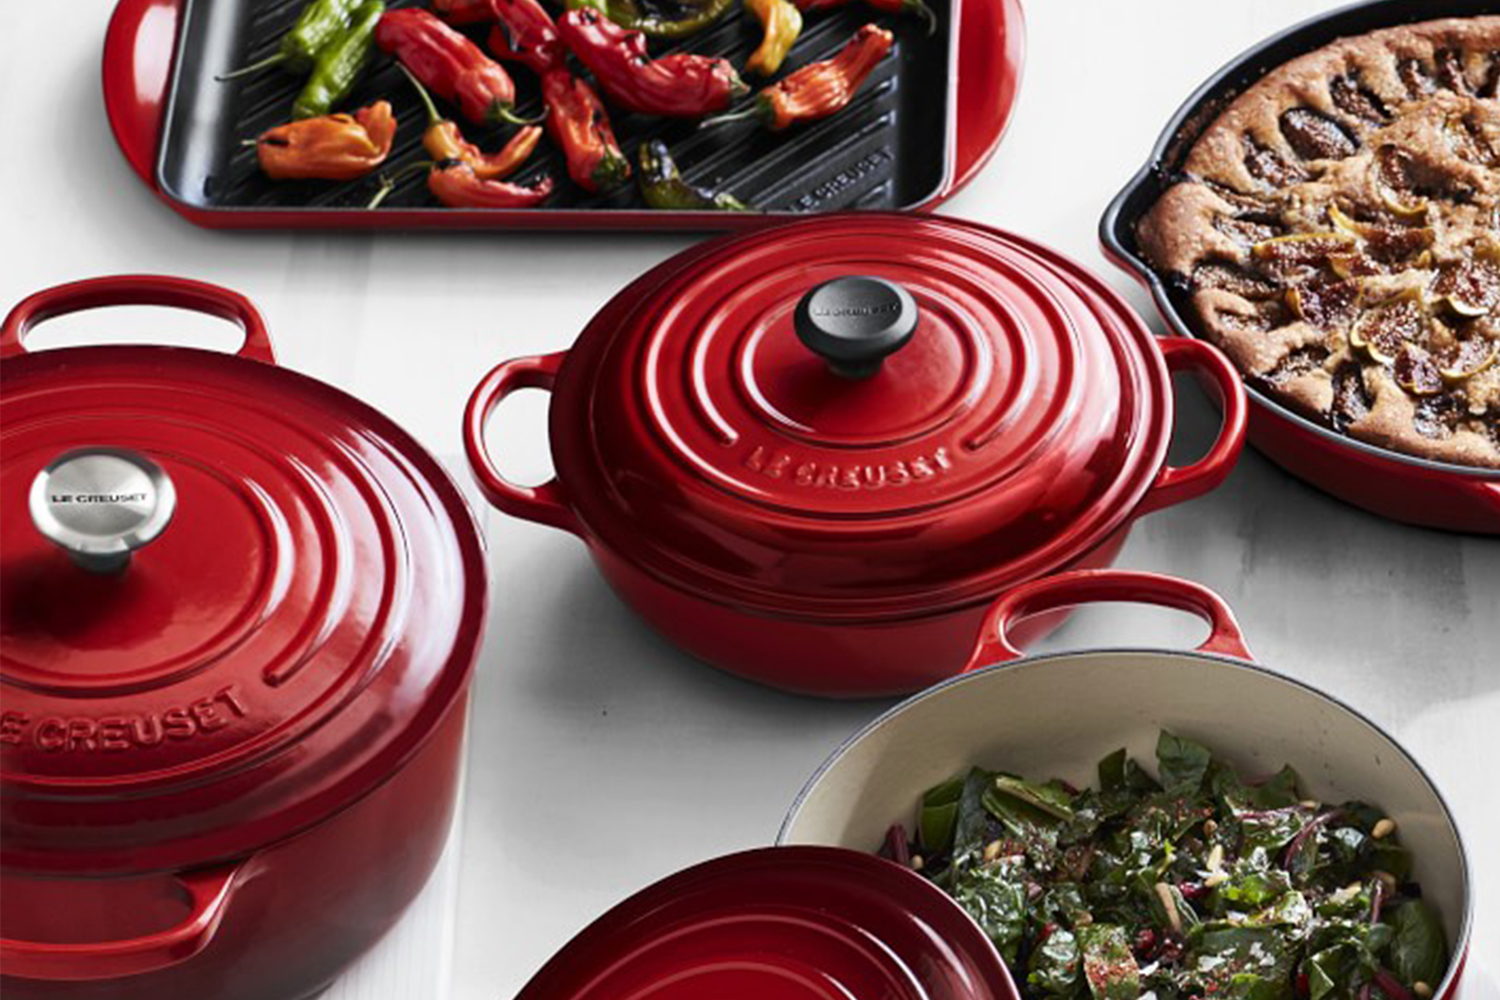 Le Creuset 7.25-Quart Dutch Oven Review: Tested and Approved